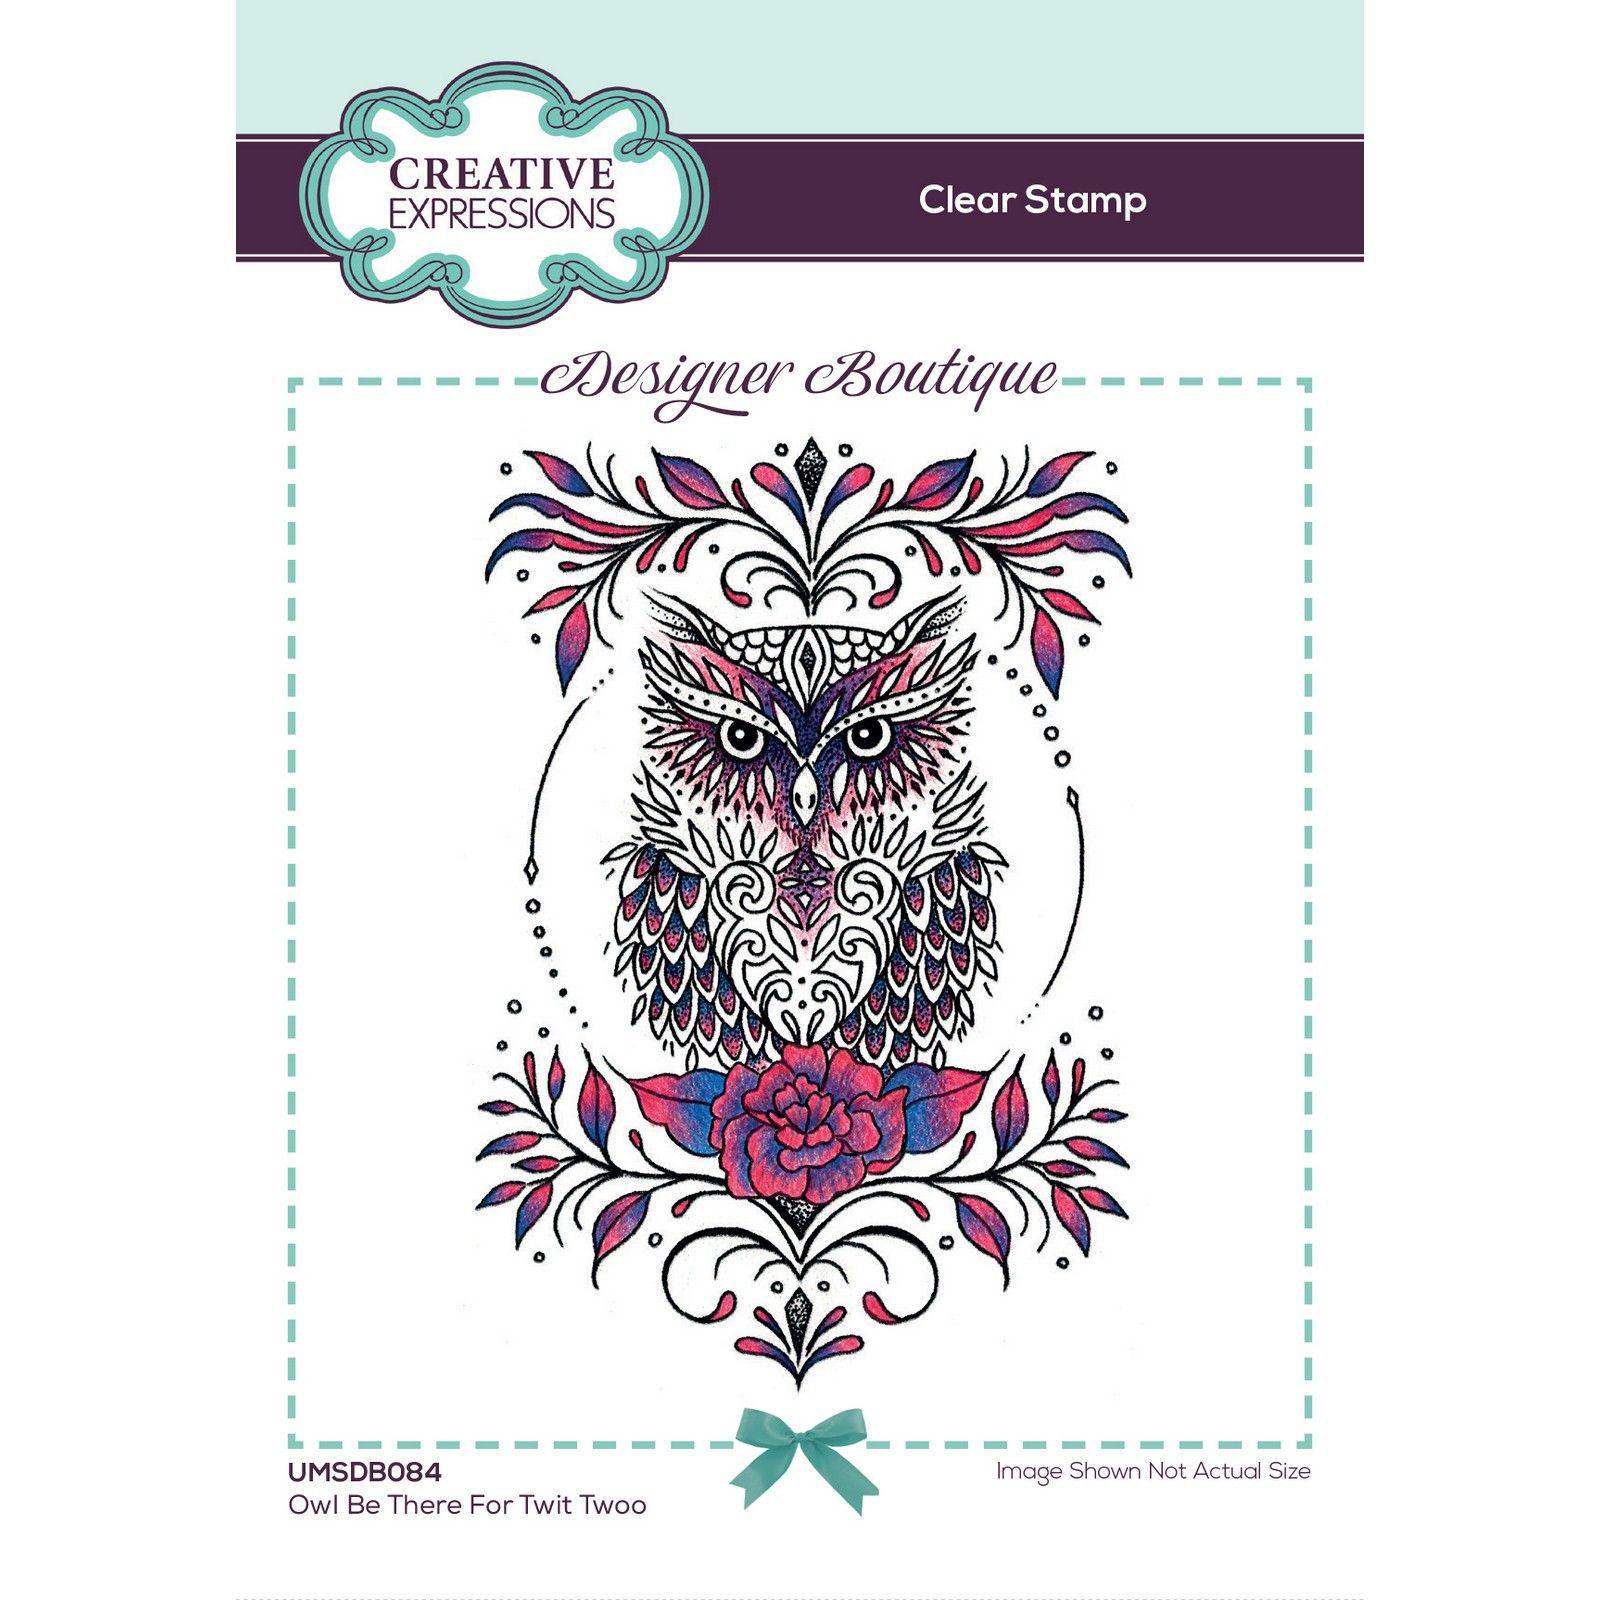 Creative Expressions • Designer boutique collection clear stempel set Owl be there for twit twoo A6